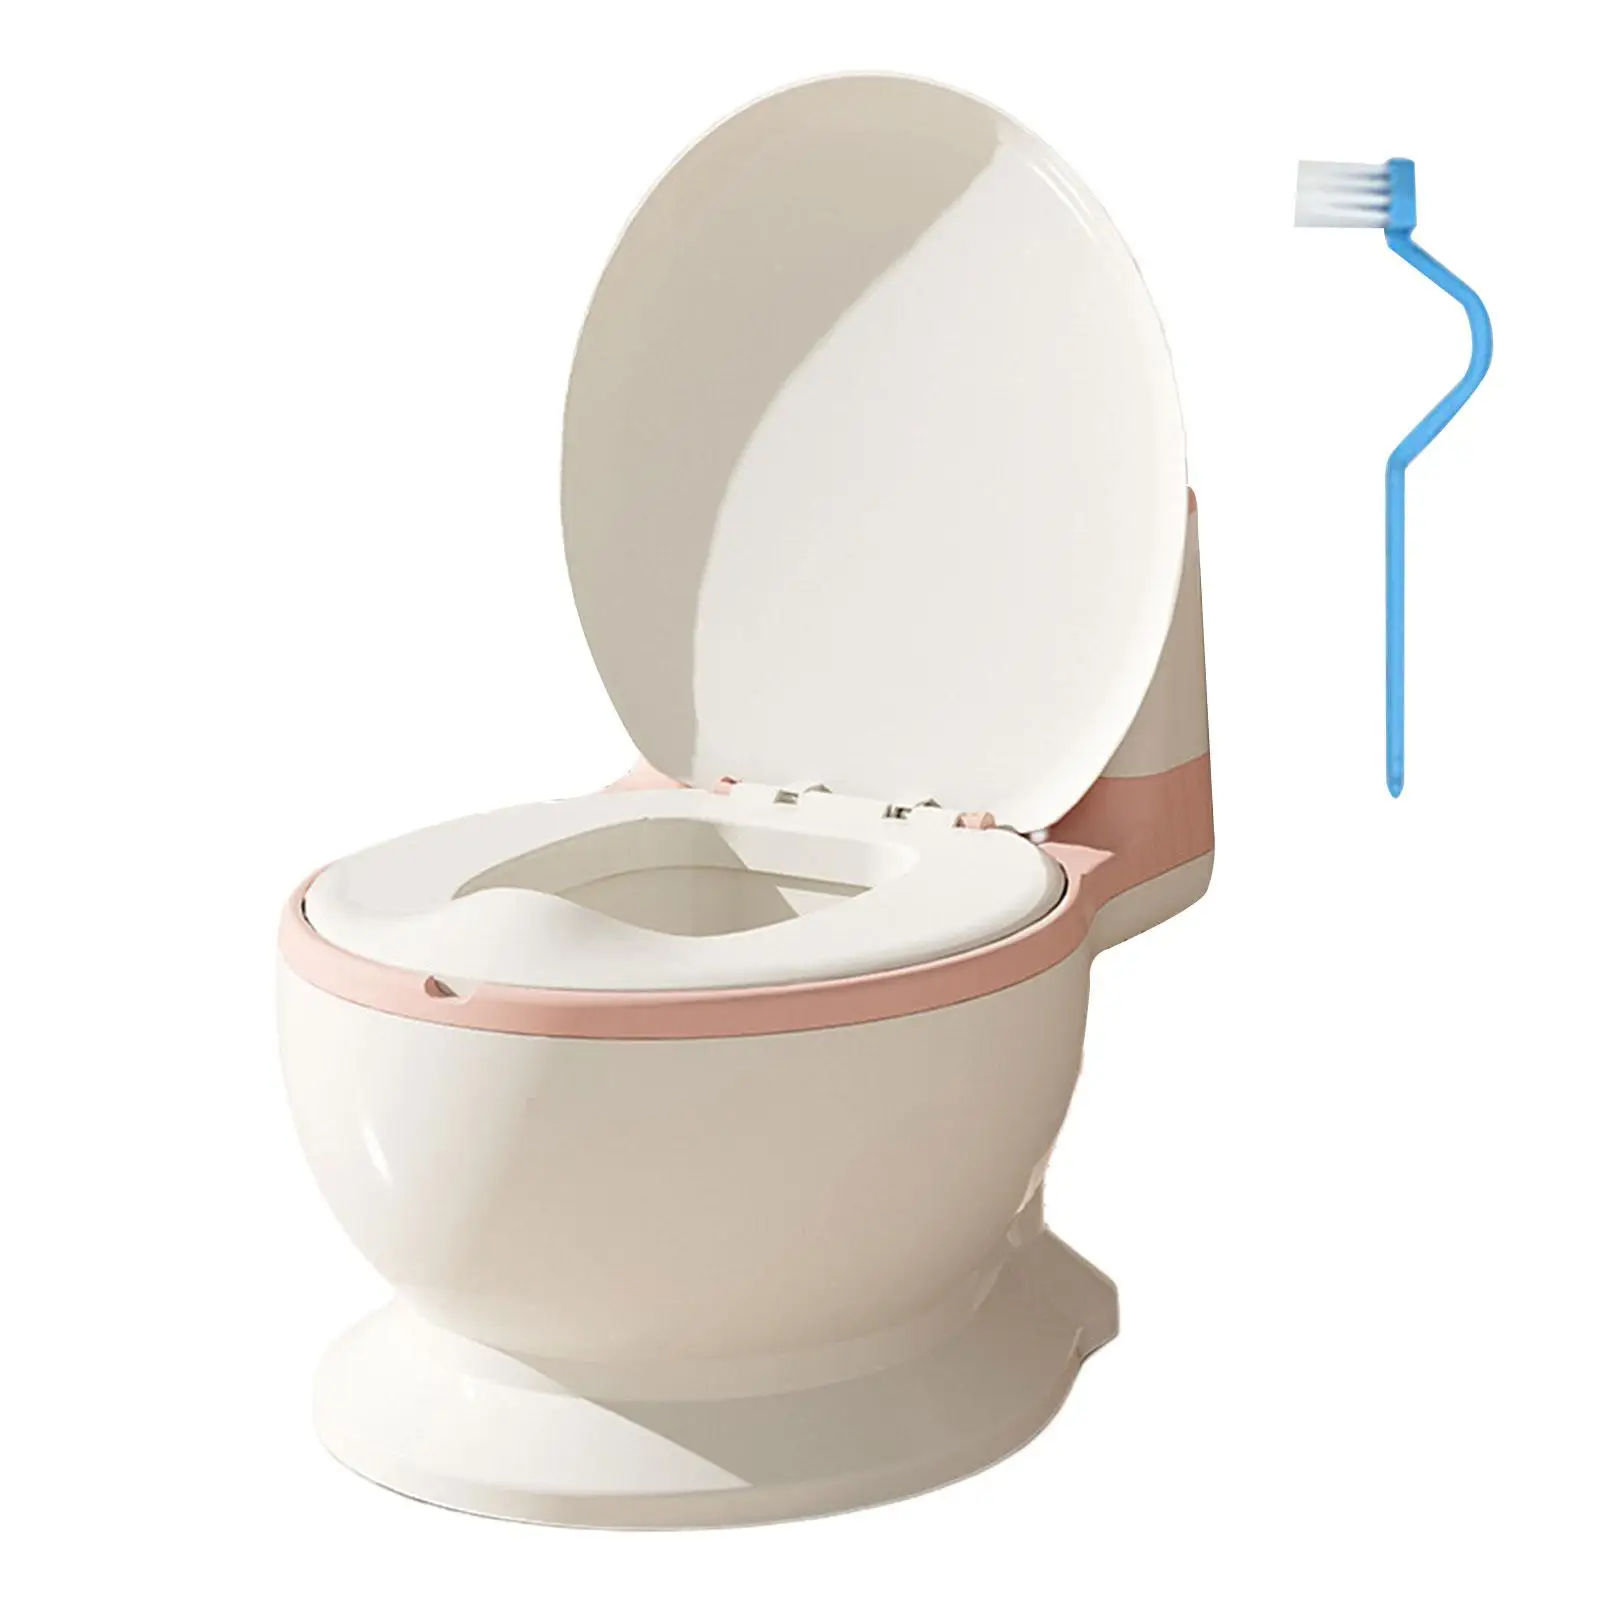 Baby Potty Toilet Non Slip Comfortable Realistic Toilet for Bedroom Ages 0-7